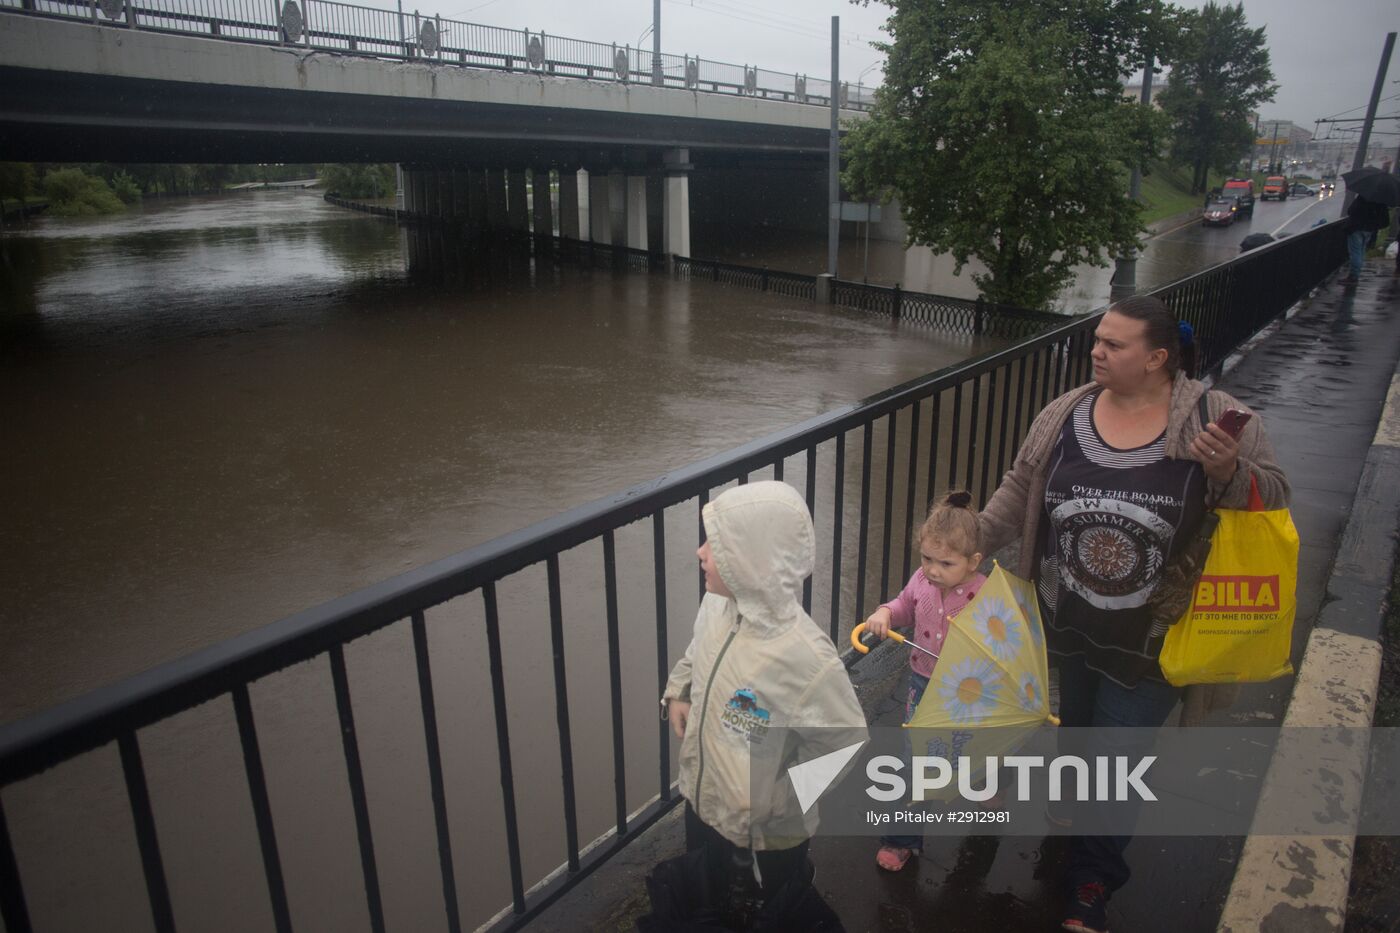 Yauza River flooding causes tailbacks in Moscow